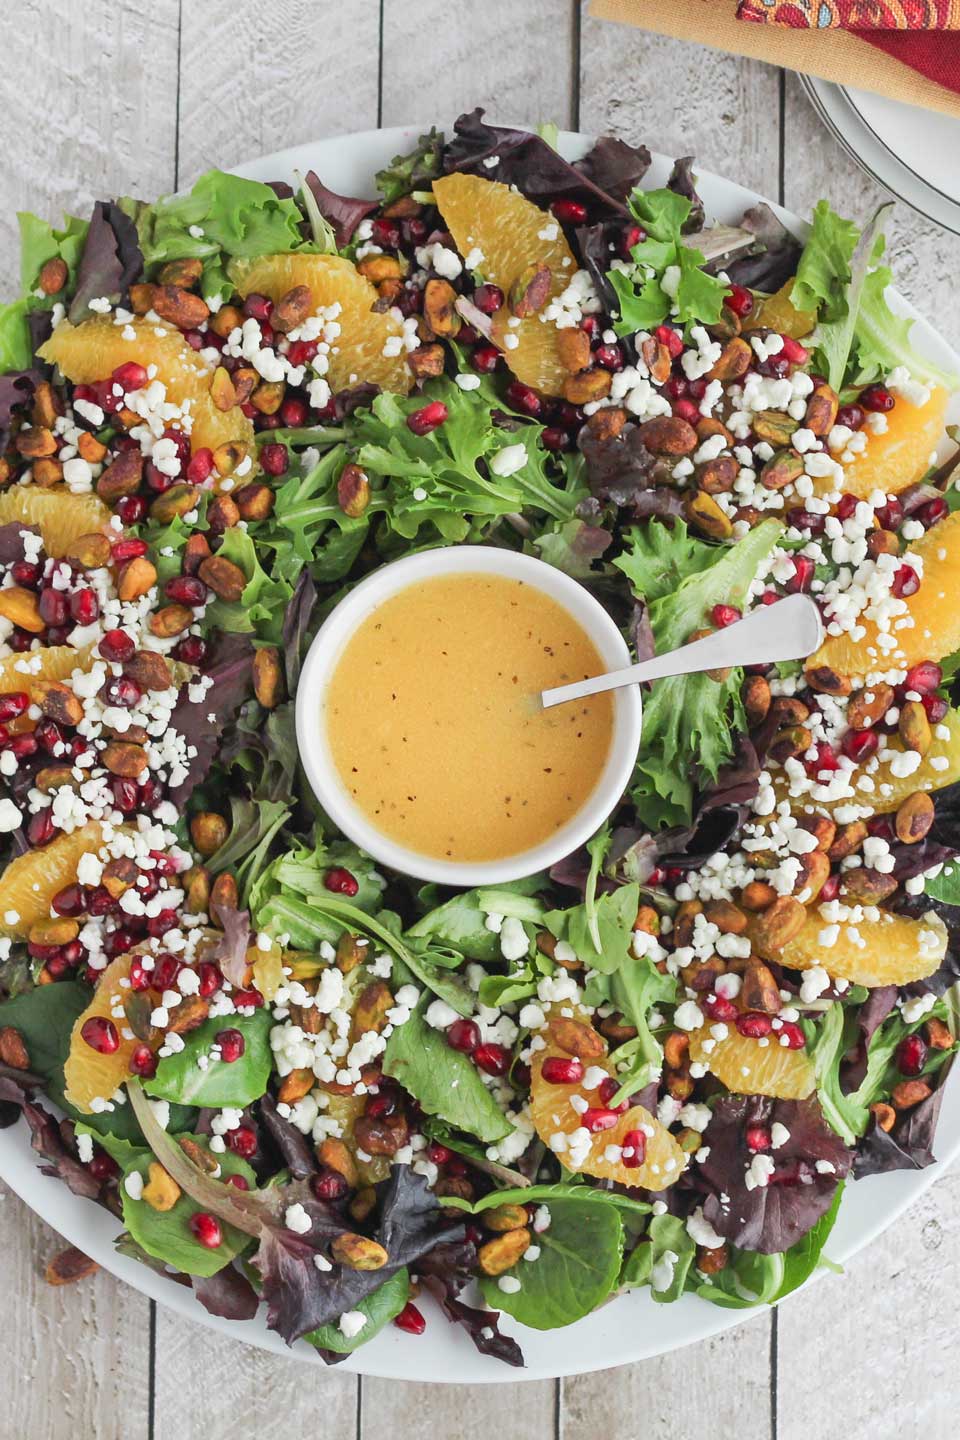 Our easy, beautiful Christmas Salad can even be served as a wreath! A perfect holiday salad, absolutely brimming with goat cheese, pomegranate arils, crunchy pistachios, and juicy orange slices – what a showstopper!